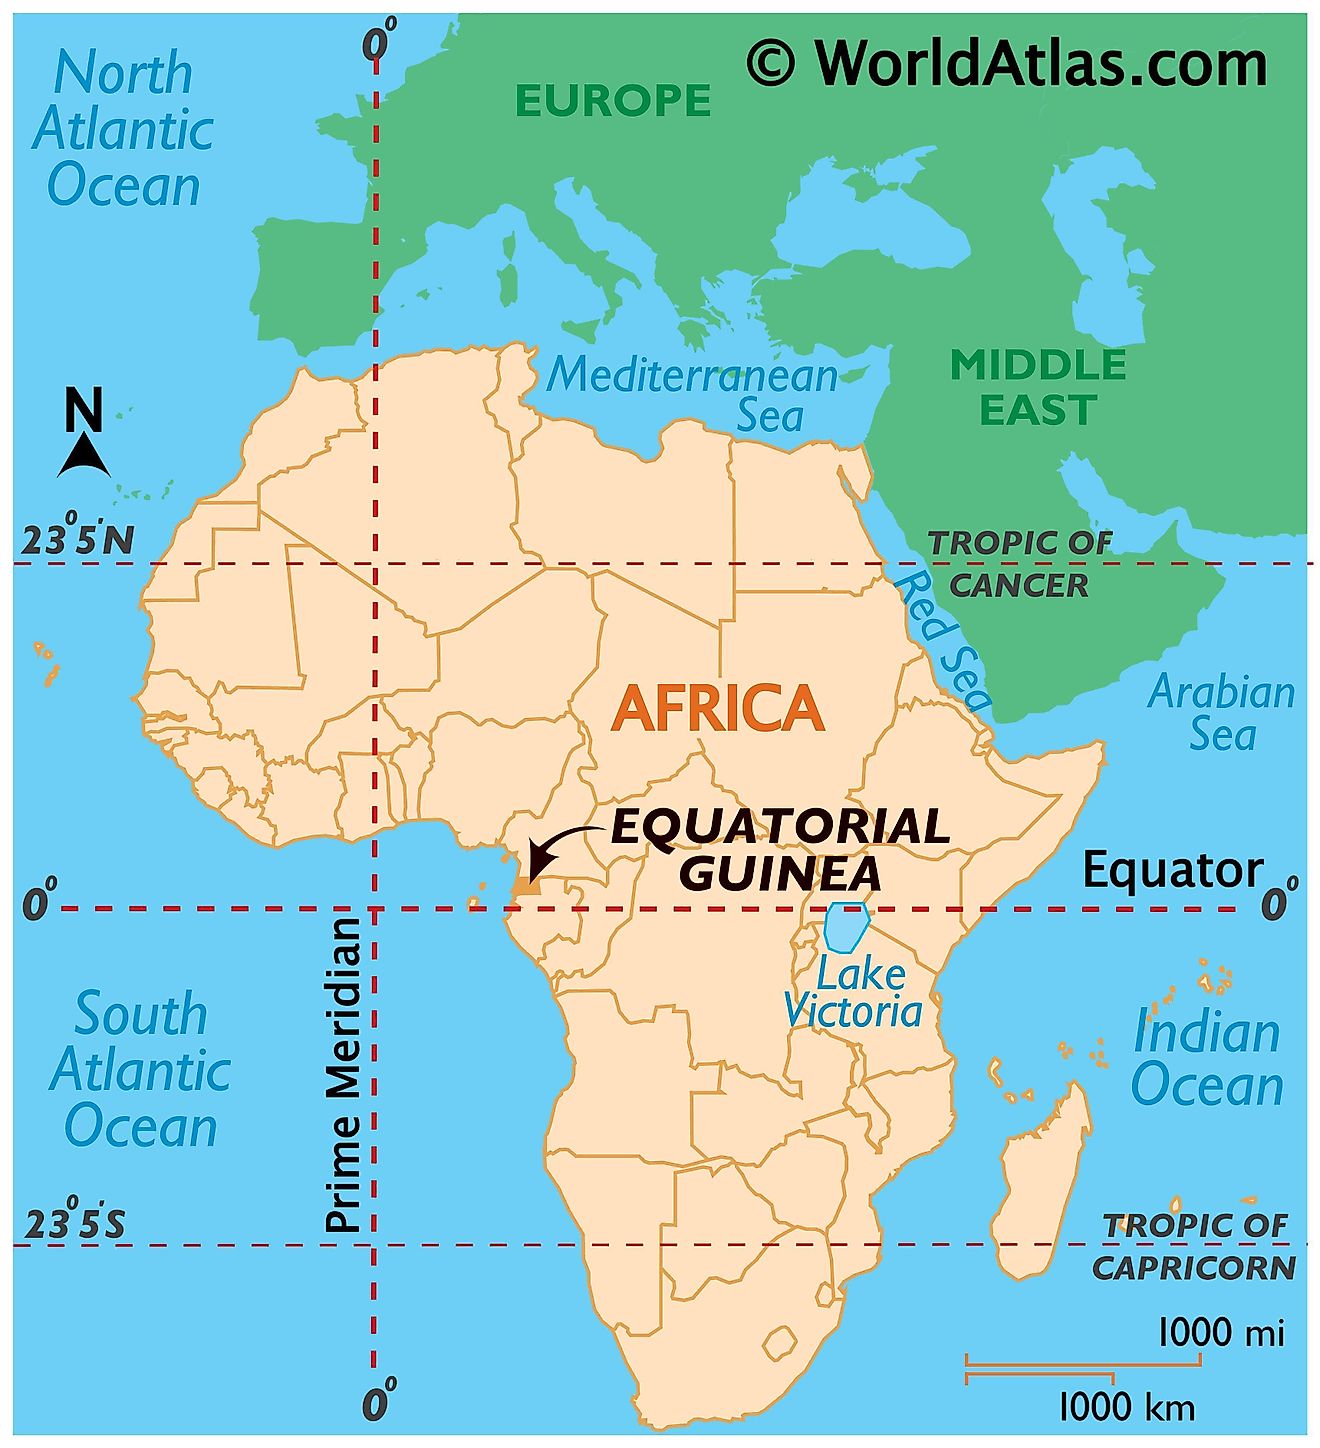 Map Of Africa With Equator World Map